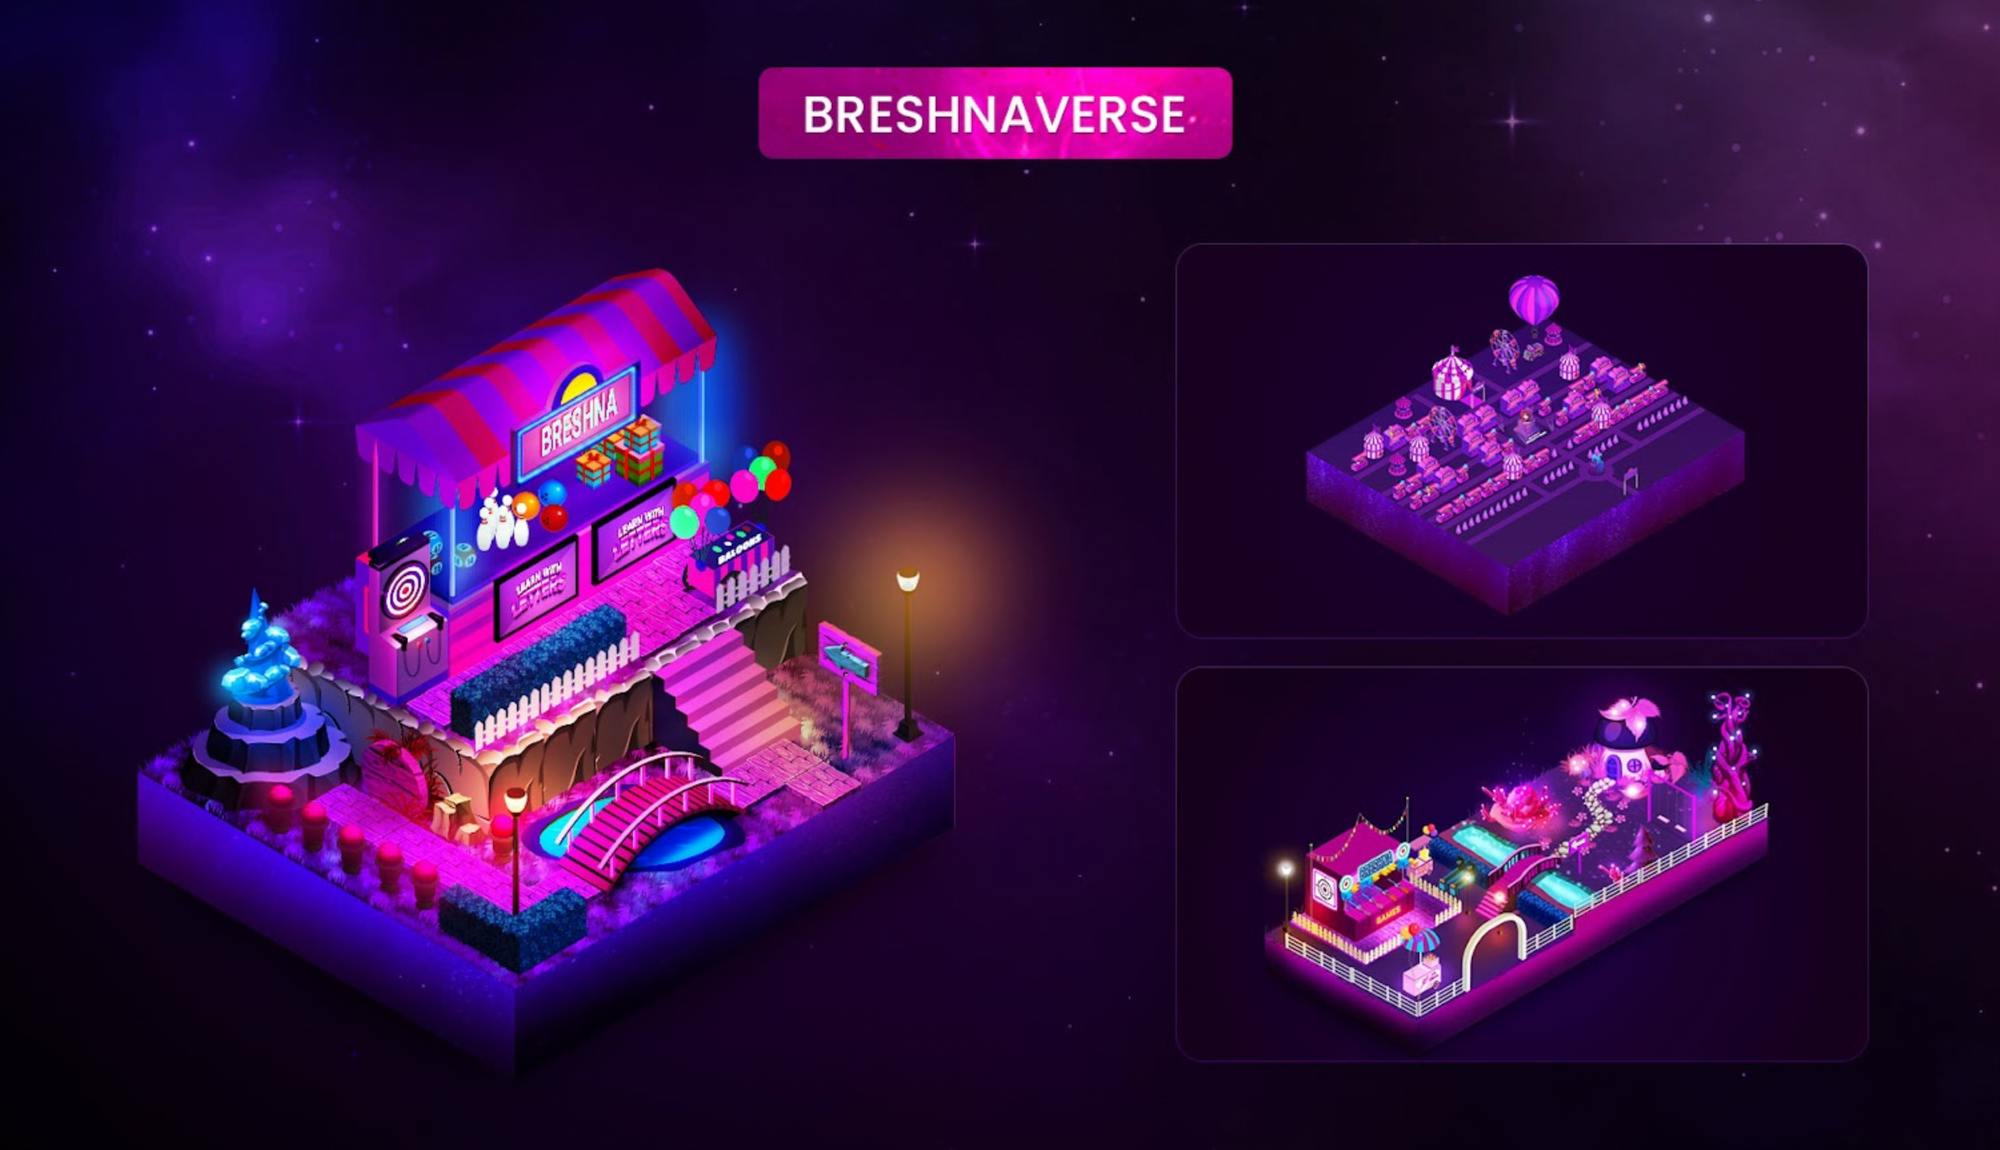 This photo shows artwork of a stand and virtual carnival for the Breshnaverse